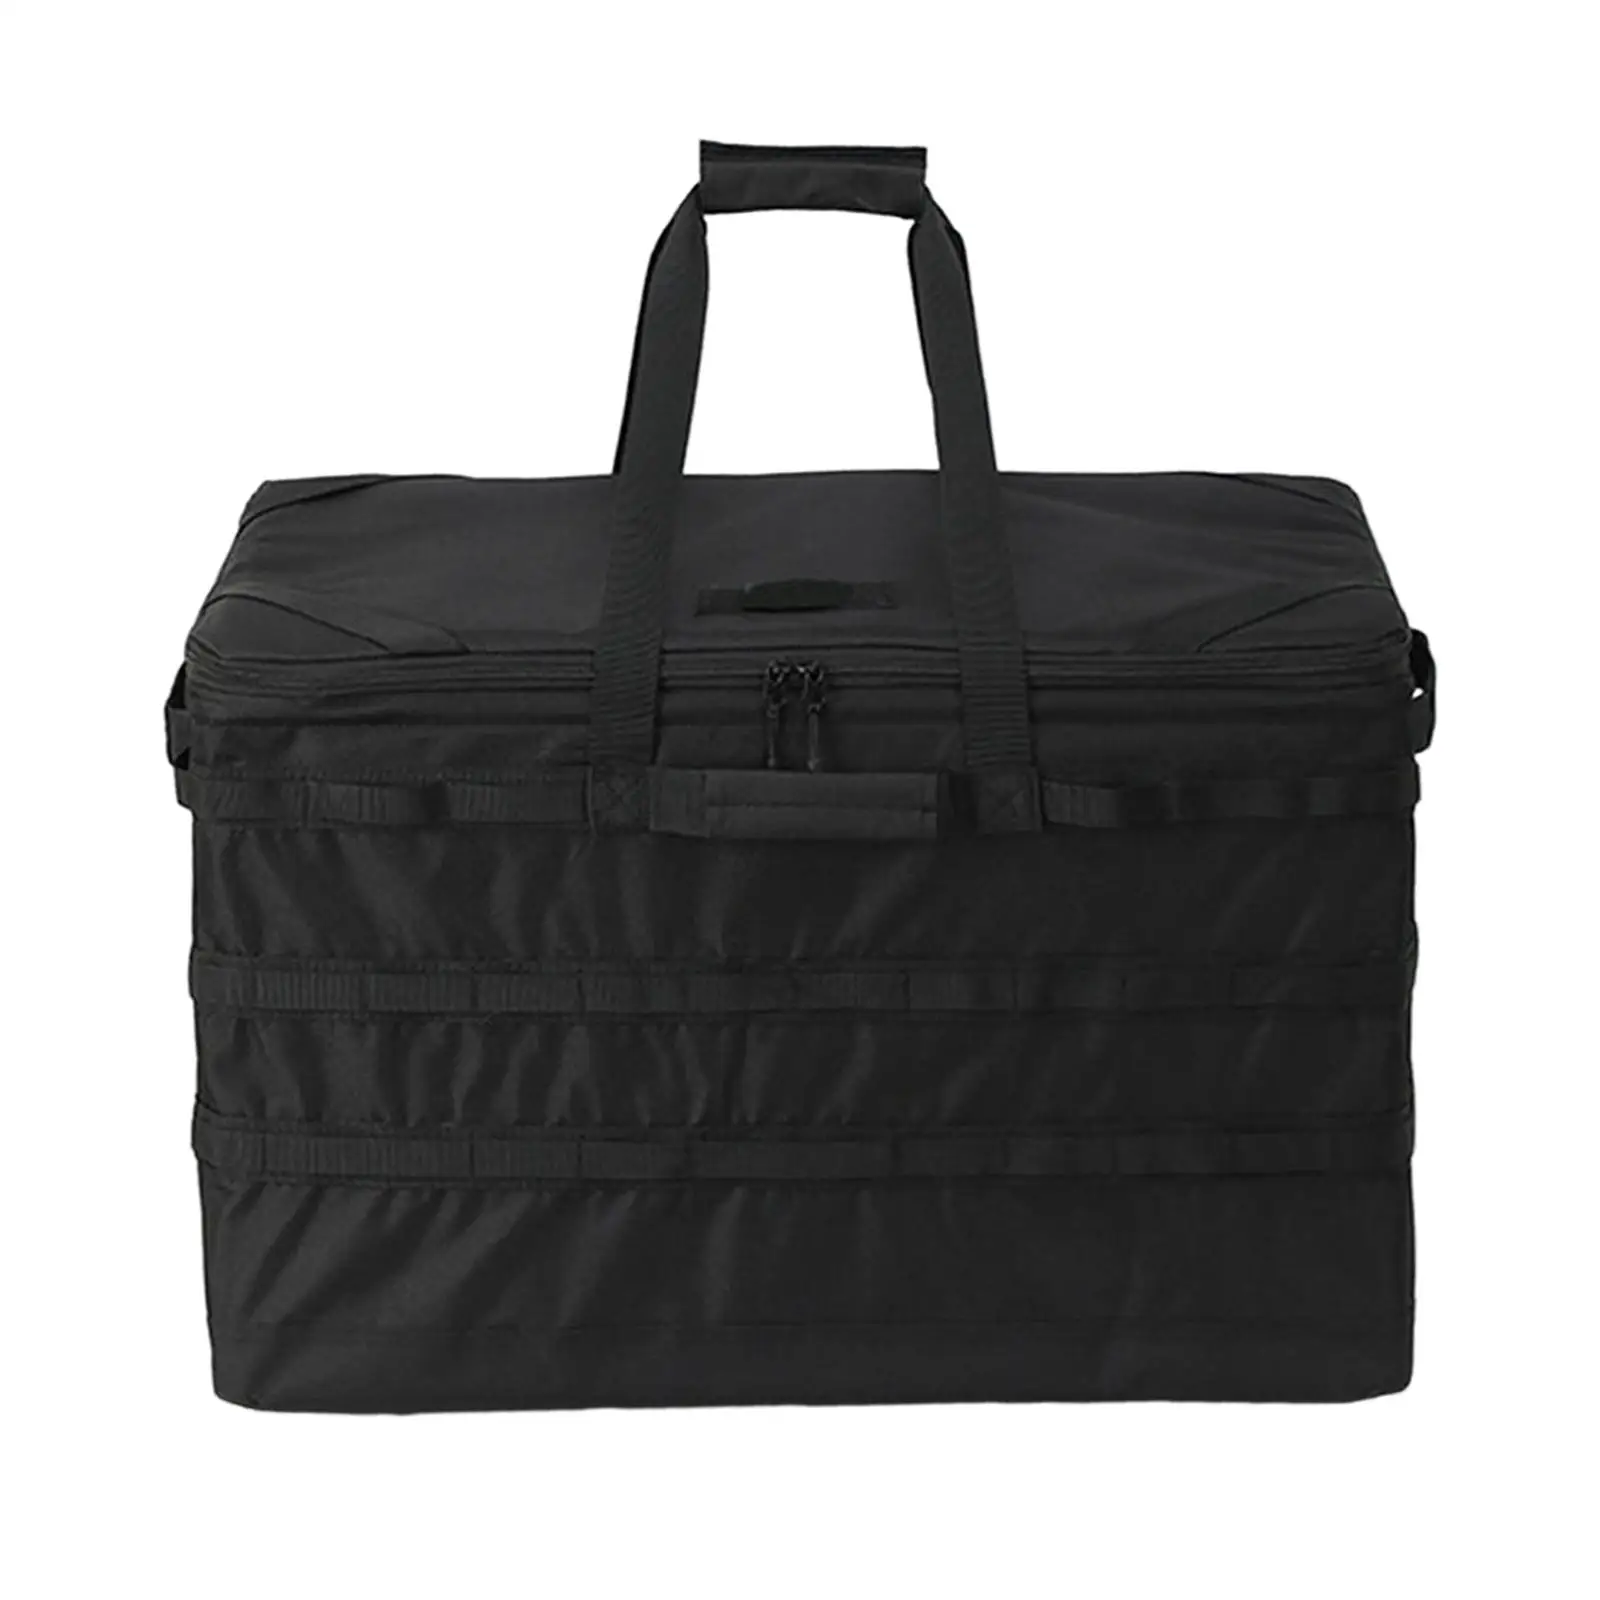 Camping Storage Bag with Pockets and Compartments Large Utility Tote Bag